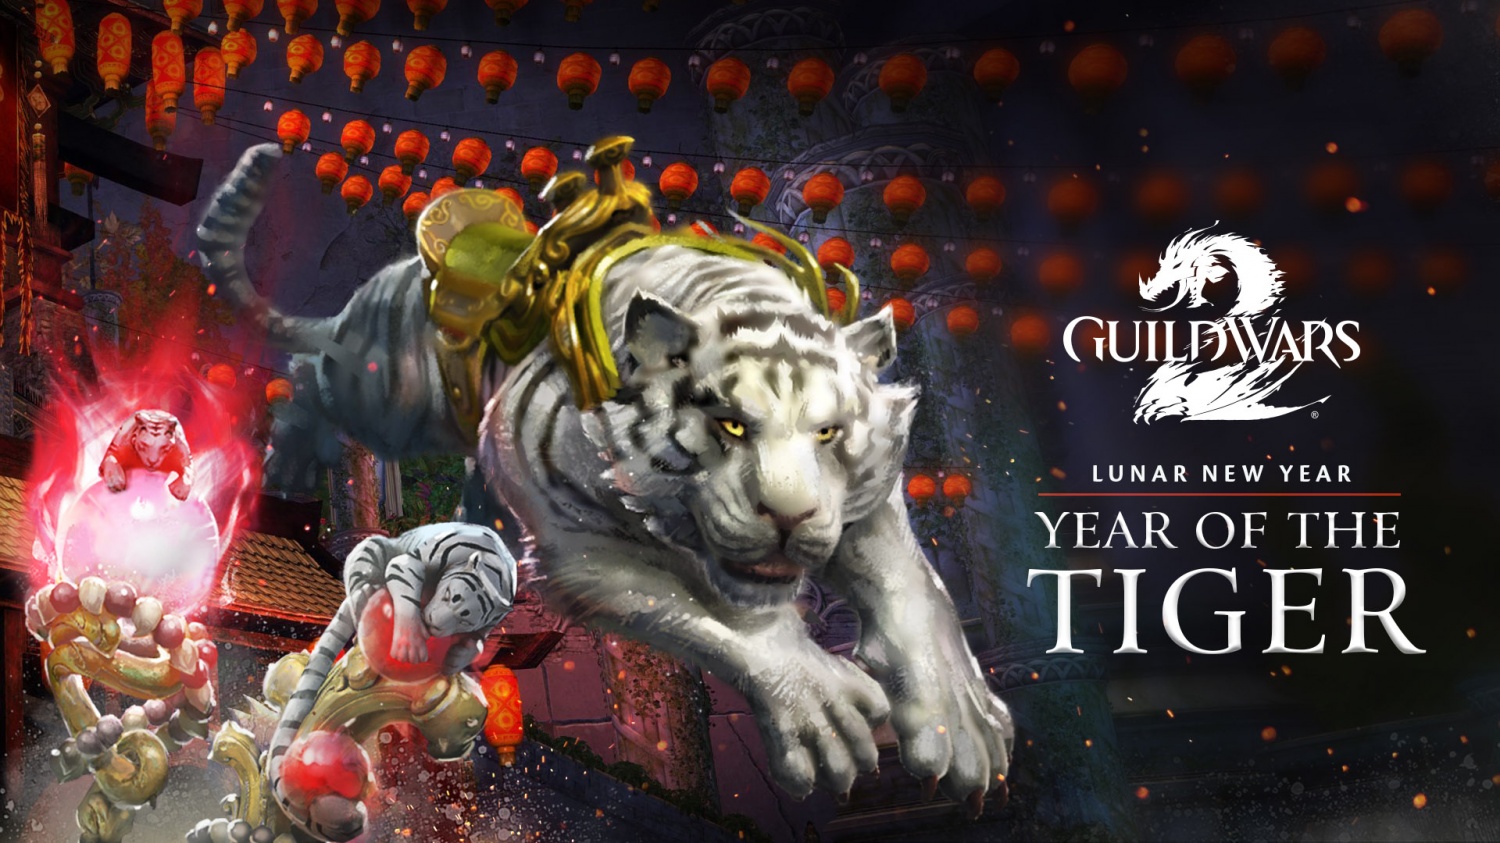 CELEBRATING THE LUNAR NEW YEAR IN GUILD WARS 2